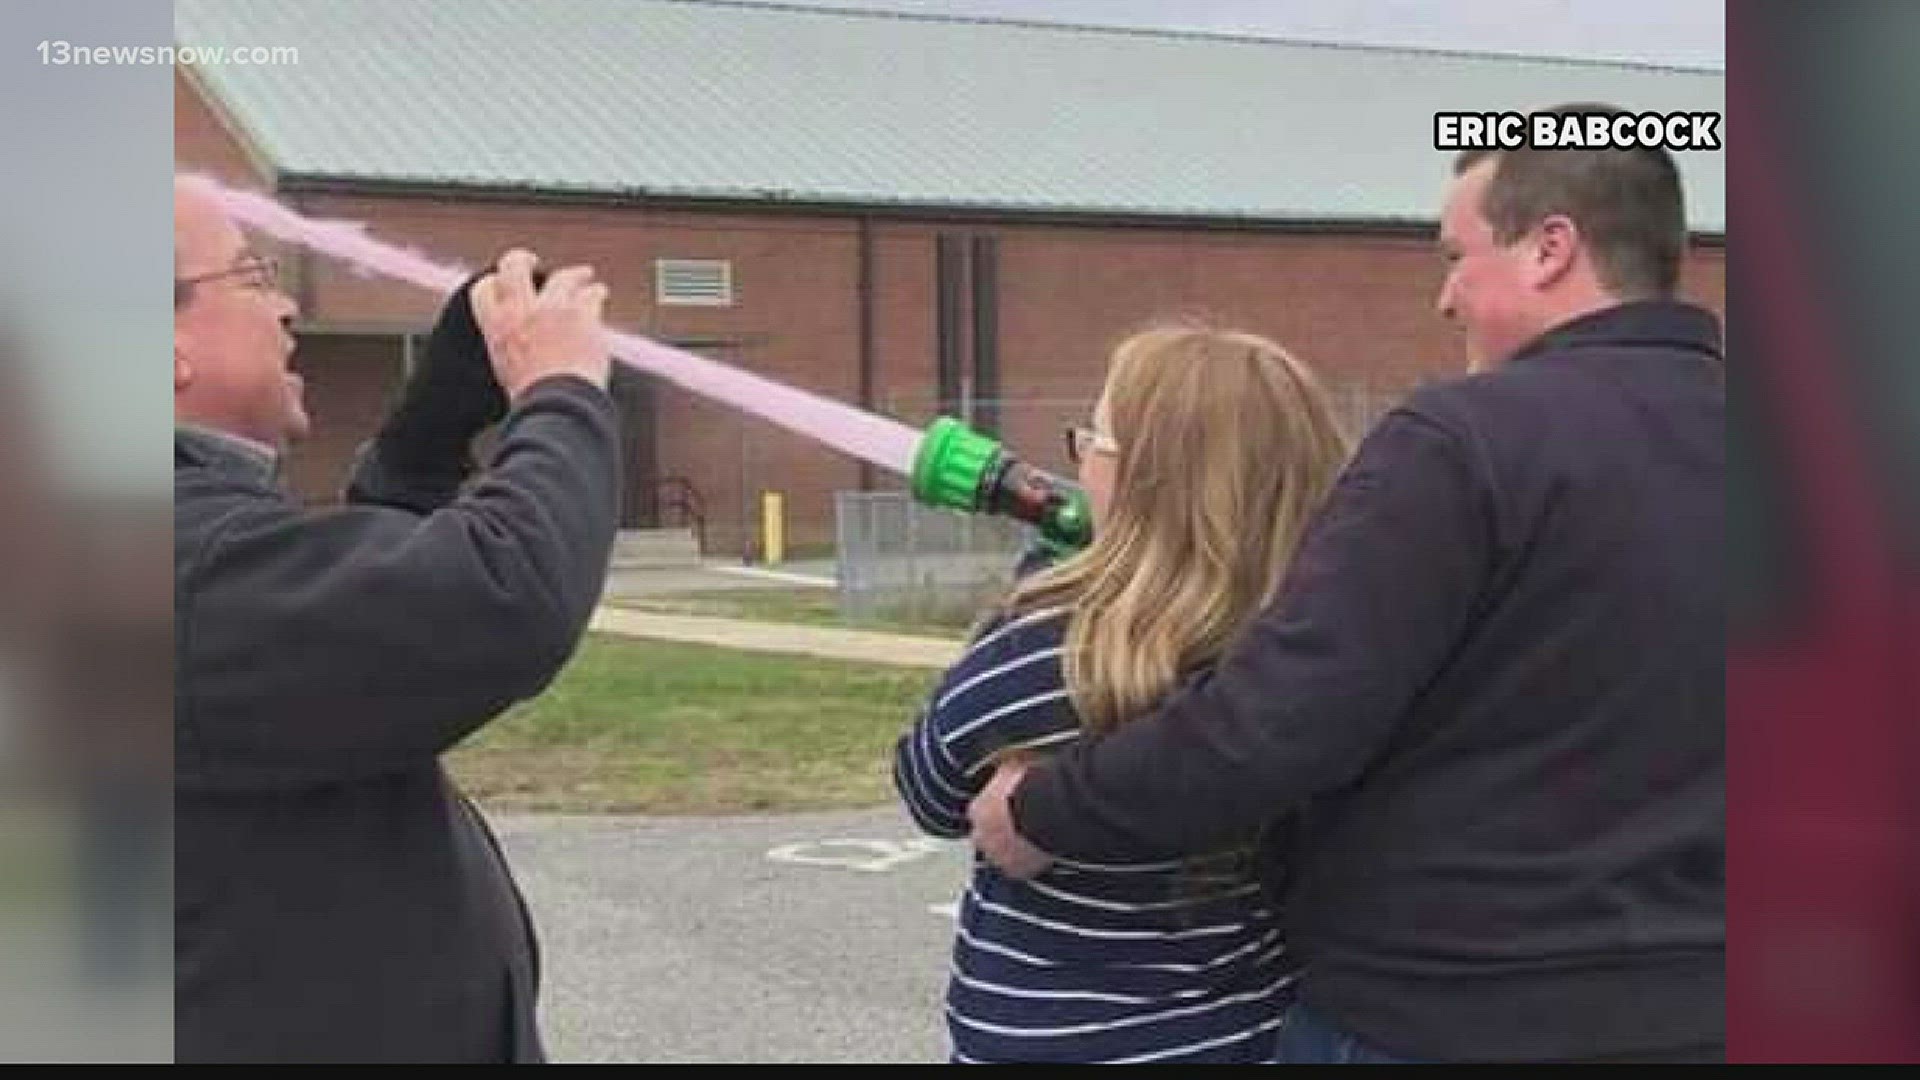 Family and friends were there for the big announcement, which was made as the couple shot dyed water out of a fire hose.